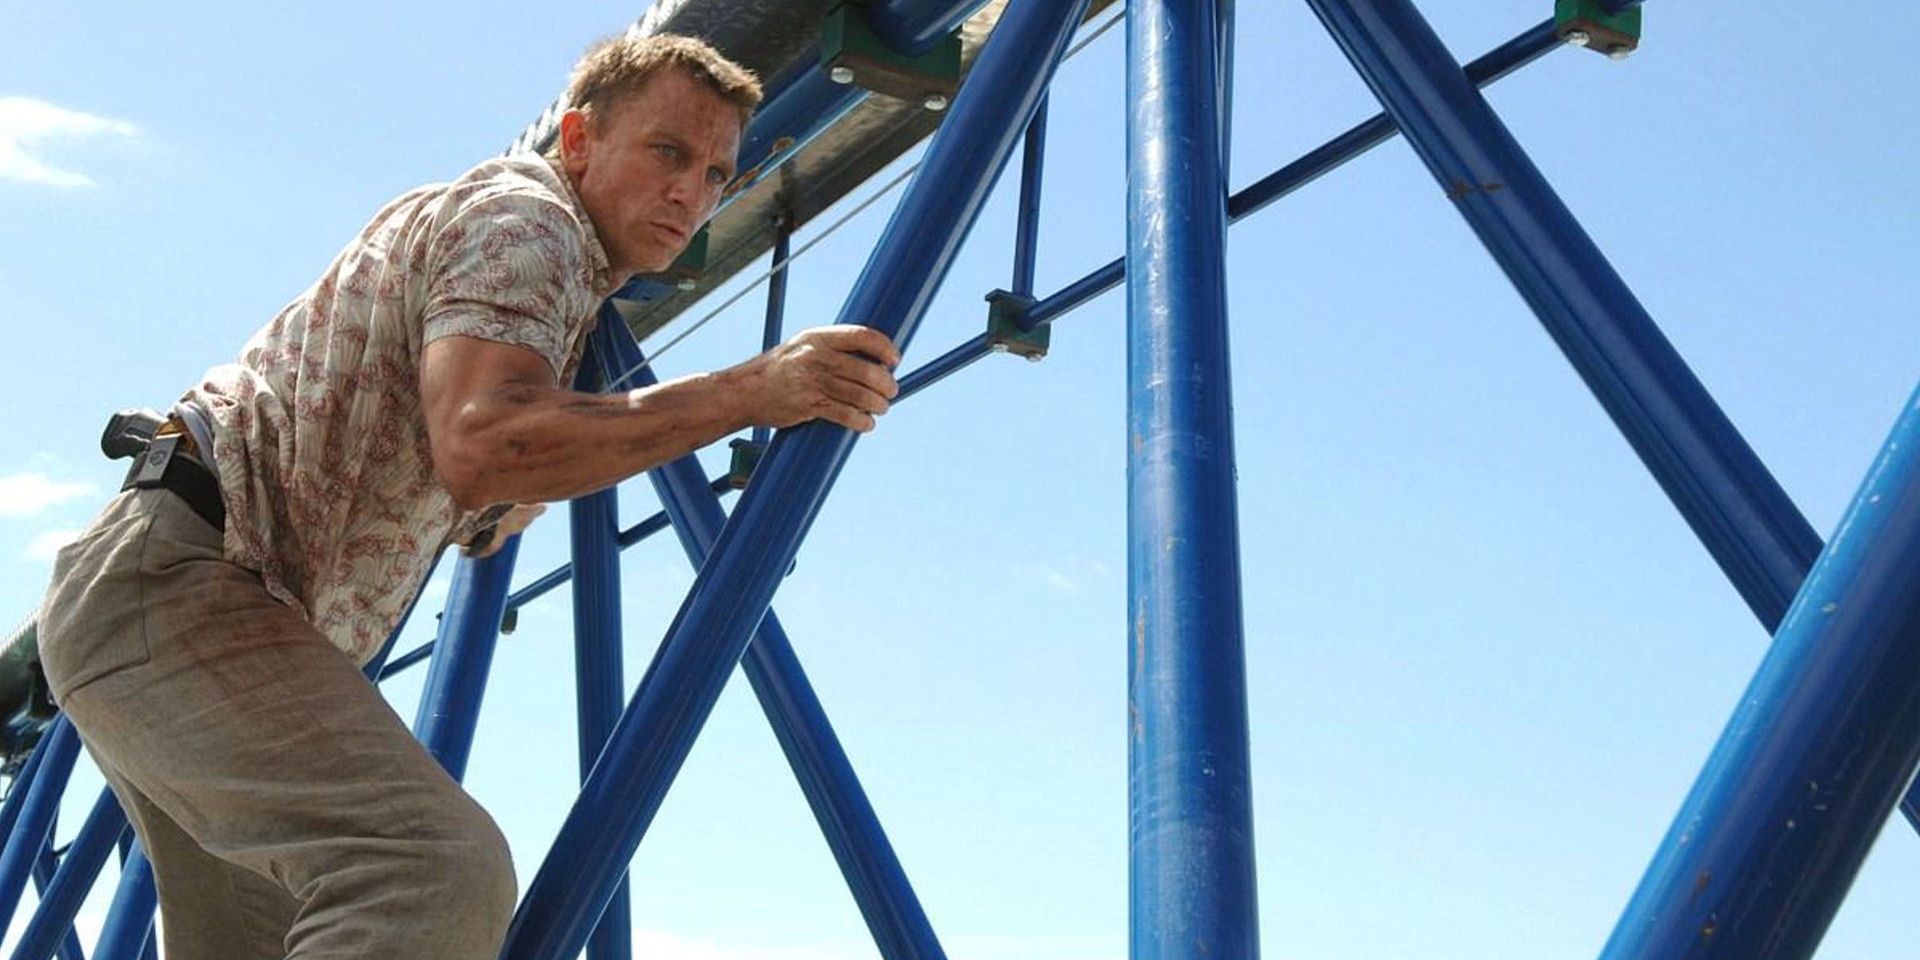 The parkour chase in Casino Royale